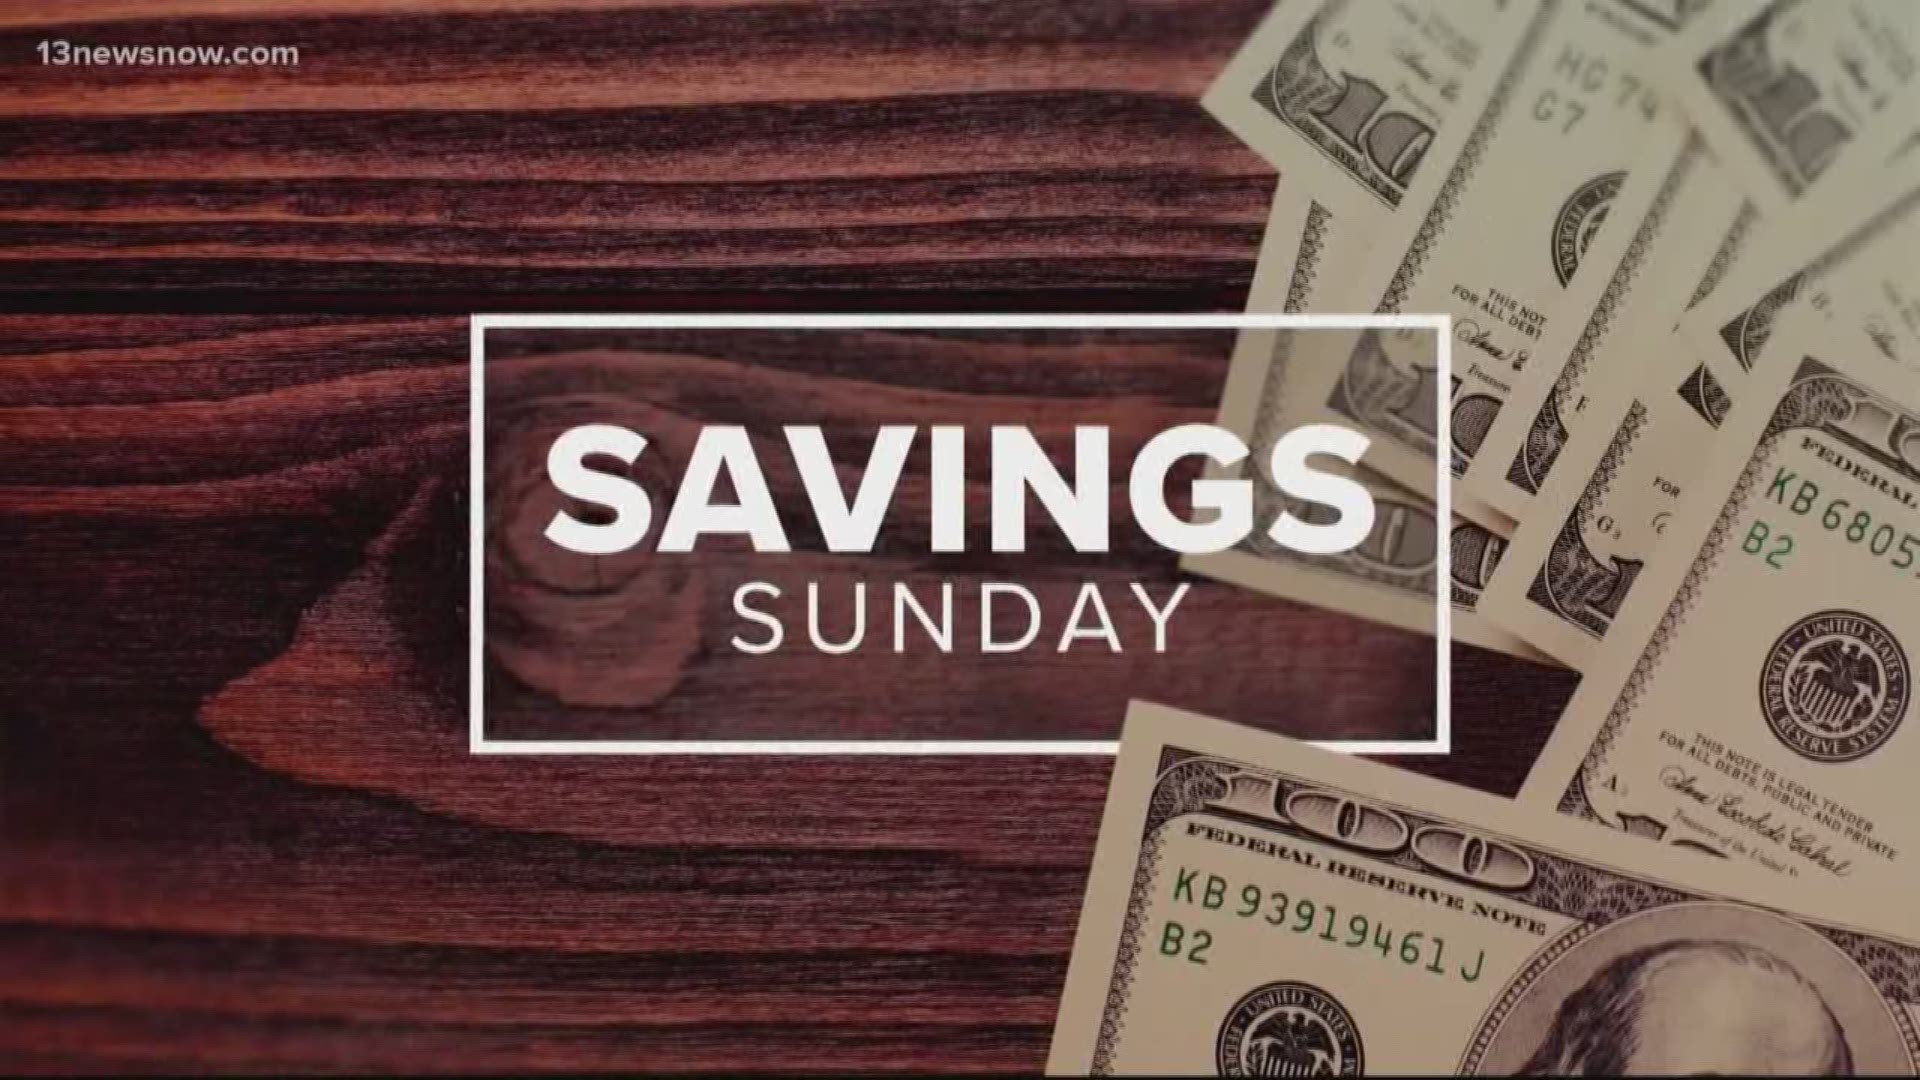 Laura Oliver from www.afrugalchick.com has your big savings for the week of Sept. 15, 2019.